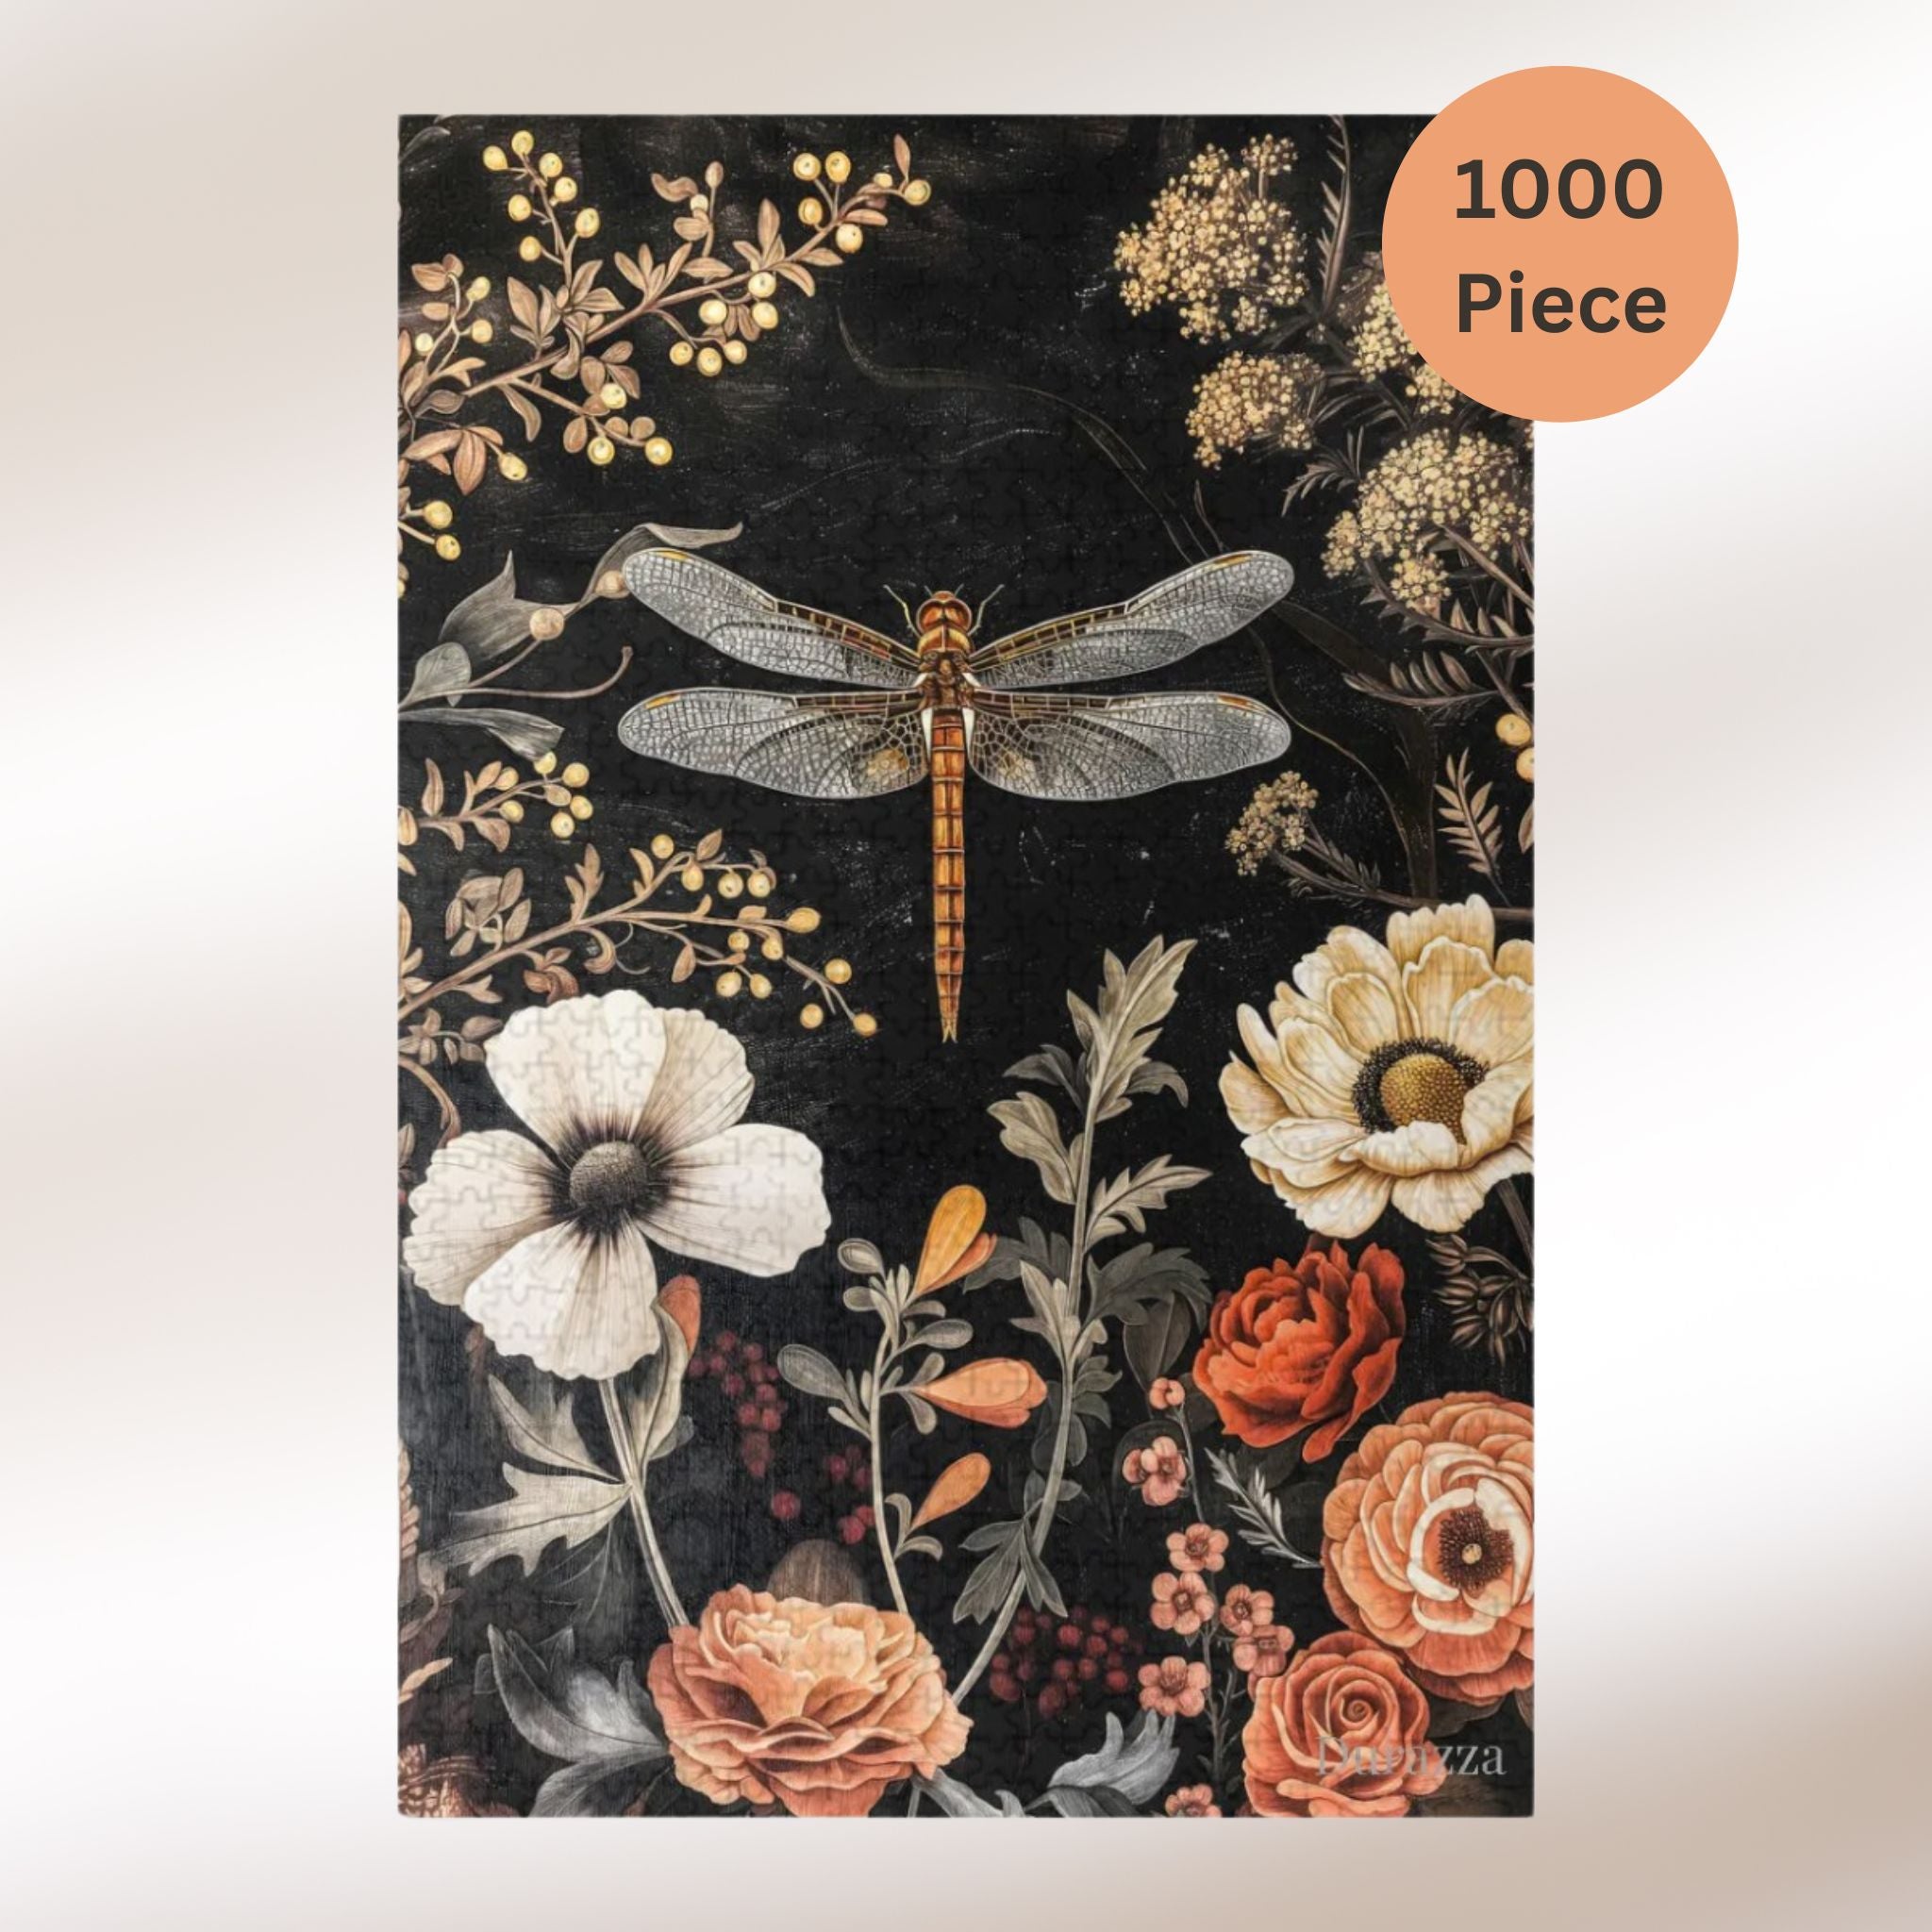 Twilight Dragonfly Wooden Jigsaw Puzzle 500 or 1000 piece